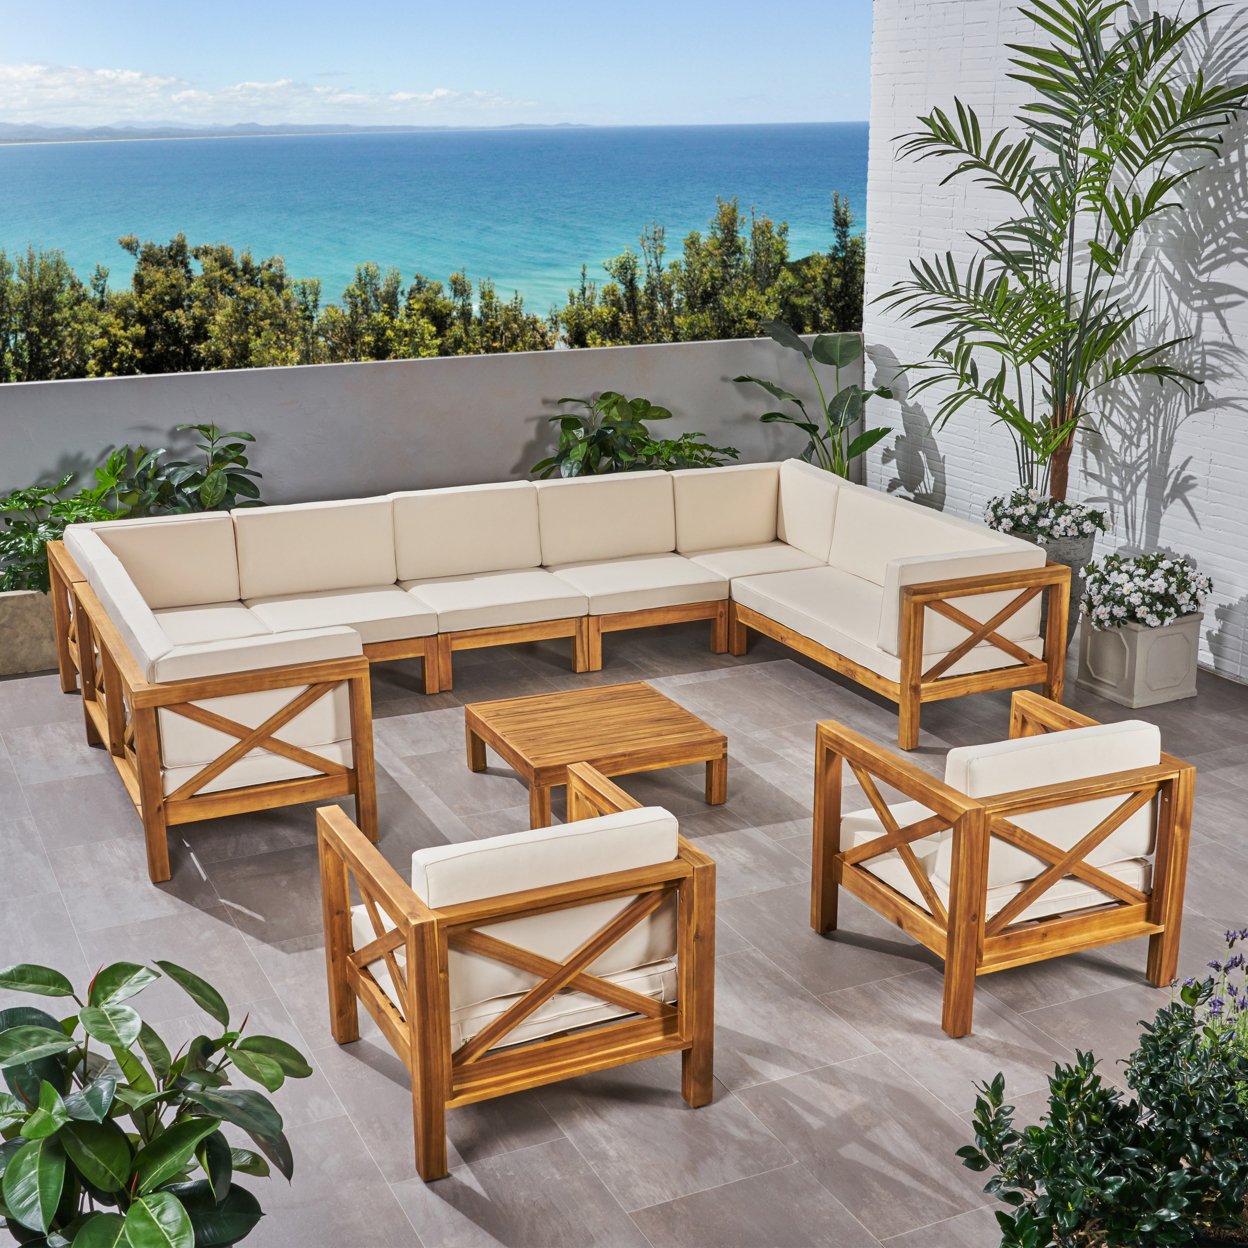 Isabella Outdoor 11 Seater Acacia Wood Sectional Sofa And Club Chair Set - Teak Finish + Beige